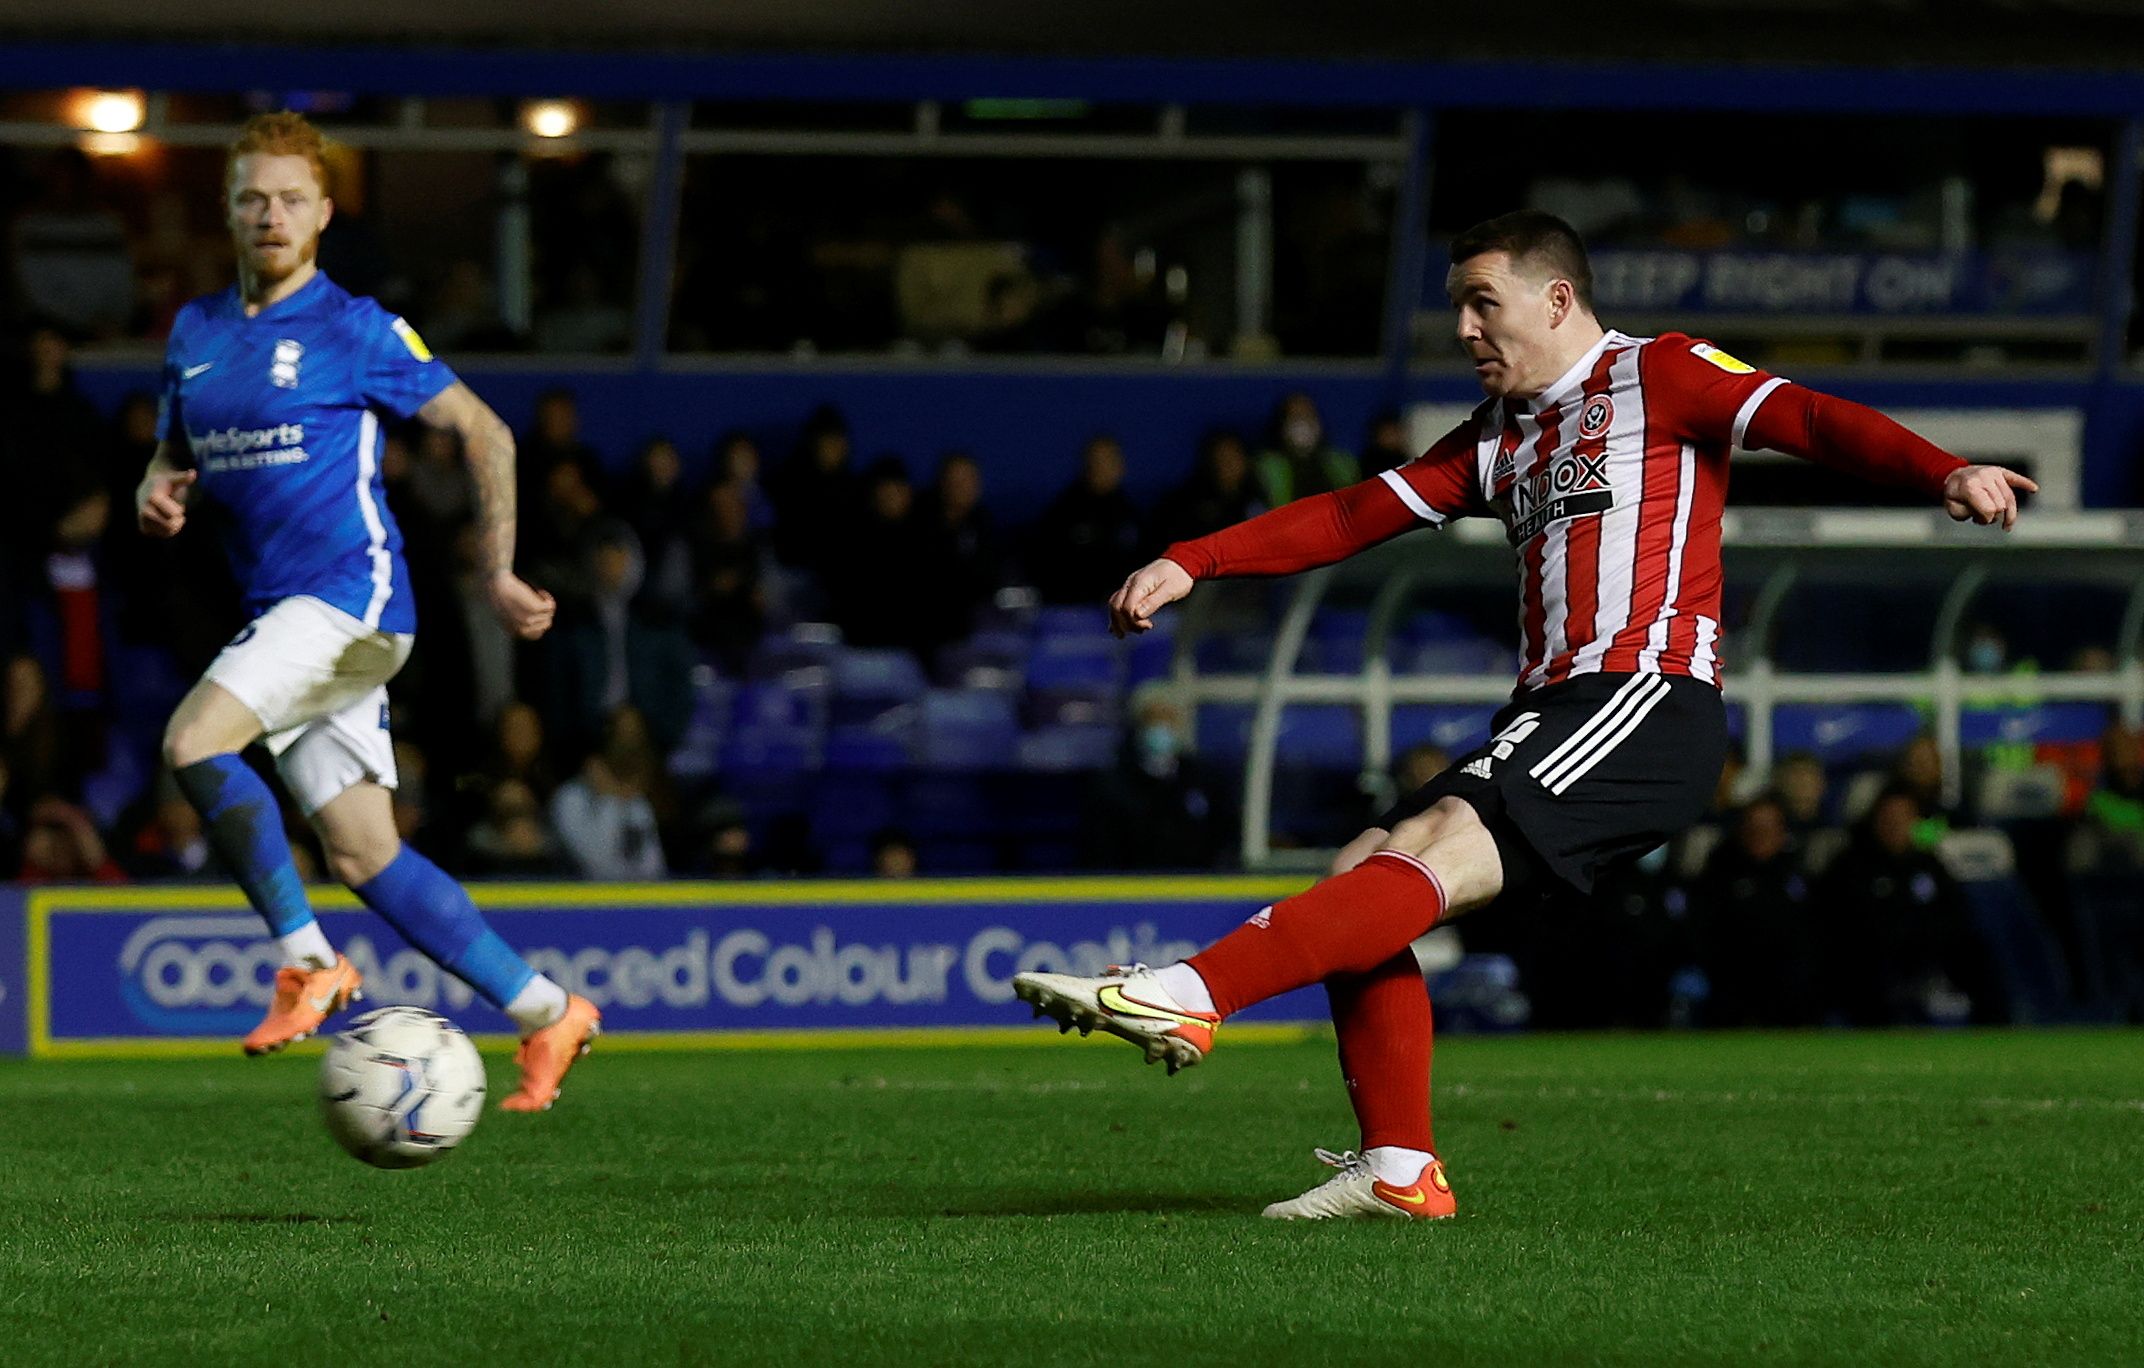 Soccer Football - Championship - Birmingham City v Sheffield United - St Andrew's, Birmingham, Britain - February 4, 2022 Sheffield United's John Fleck shoots at goal   Action Images/Jason Cairnduff  EDITORIAL USE ONLY. No use with unauthorized audio, video, data, fixture lists, club/league logos or 'live' services. Online in-match use limited to 75 images, no video emulation. No use in betting, games or single club /league/player publications. Please contact your account representative for furt